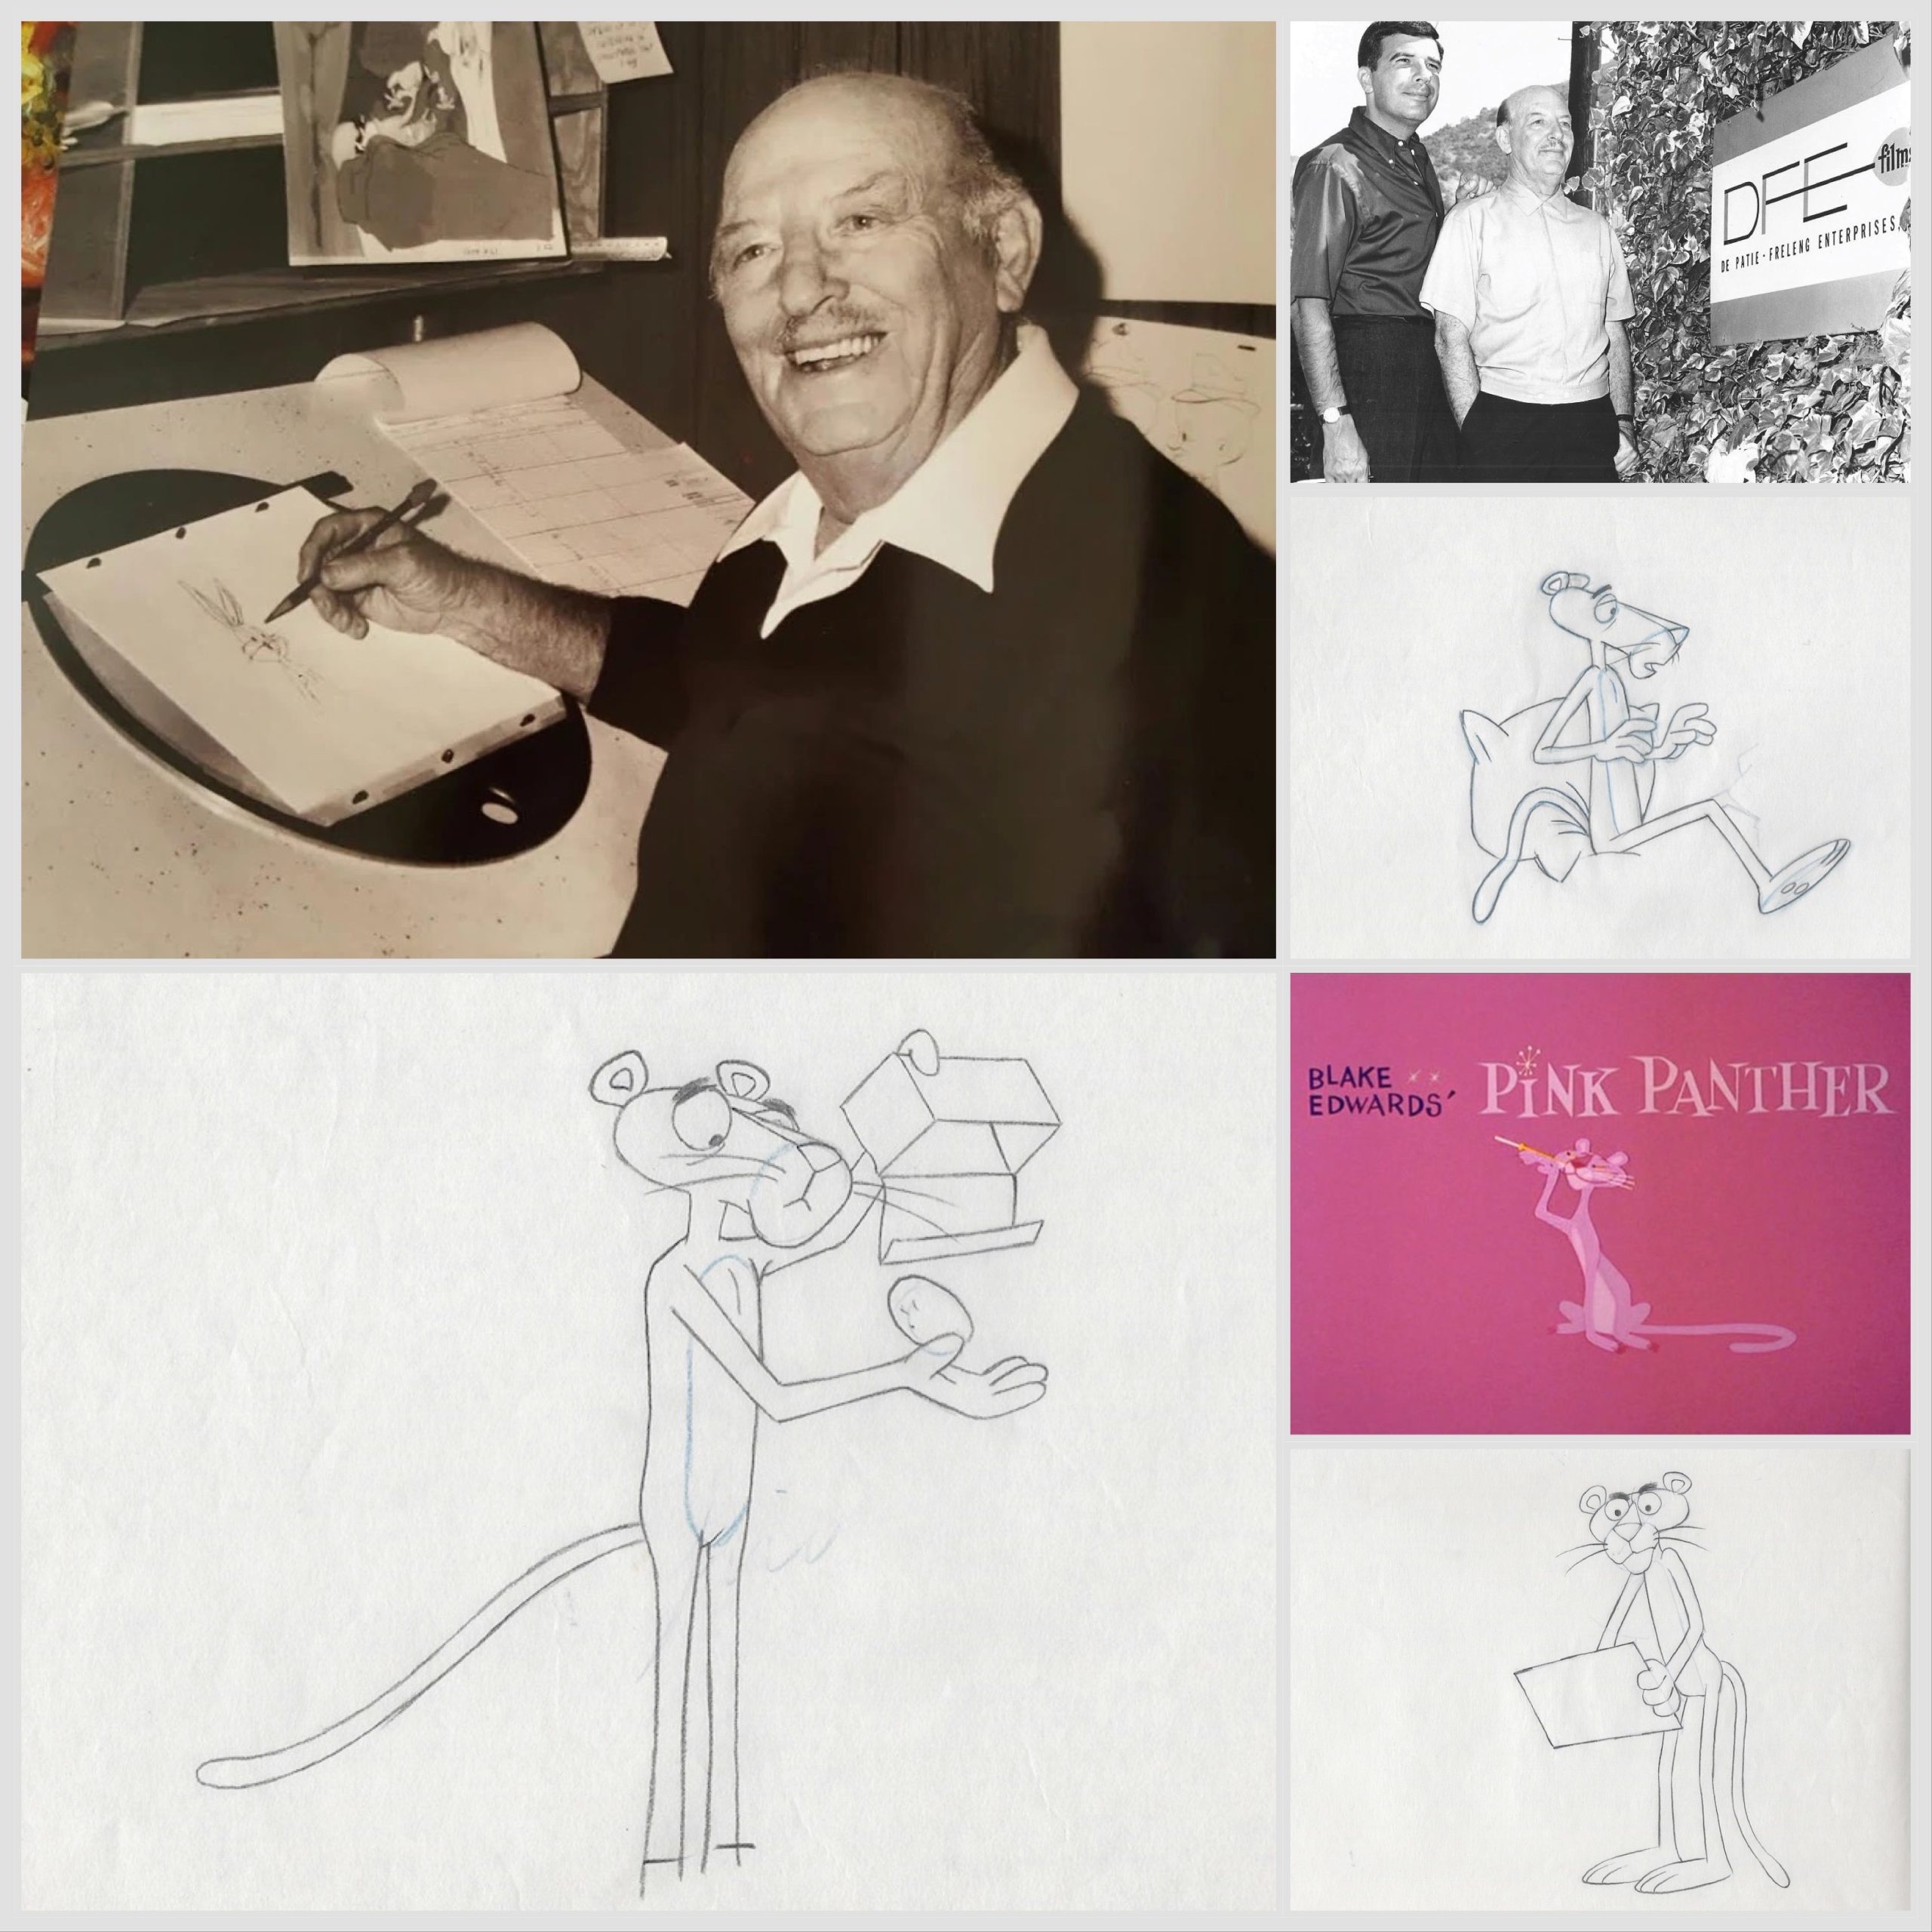 PINK PANTHER ORIGINAL ANIMATION PRODUCTION DRAWING (FROM THE 70'S) | eBay